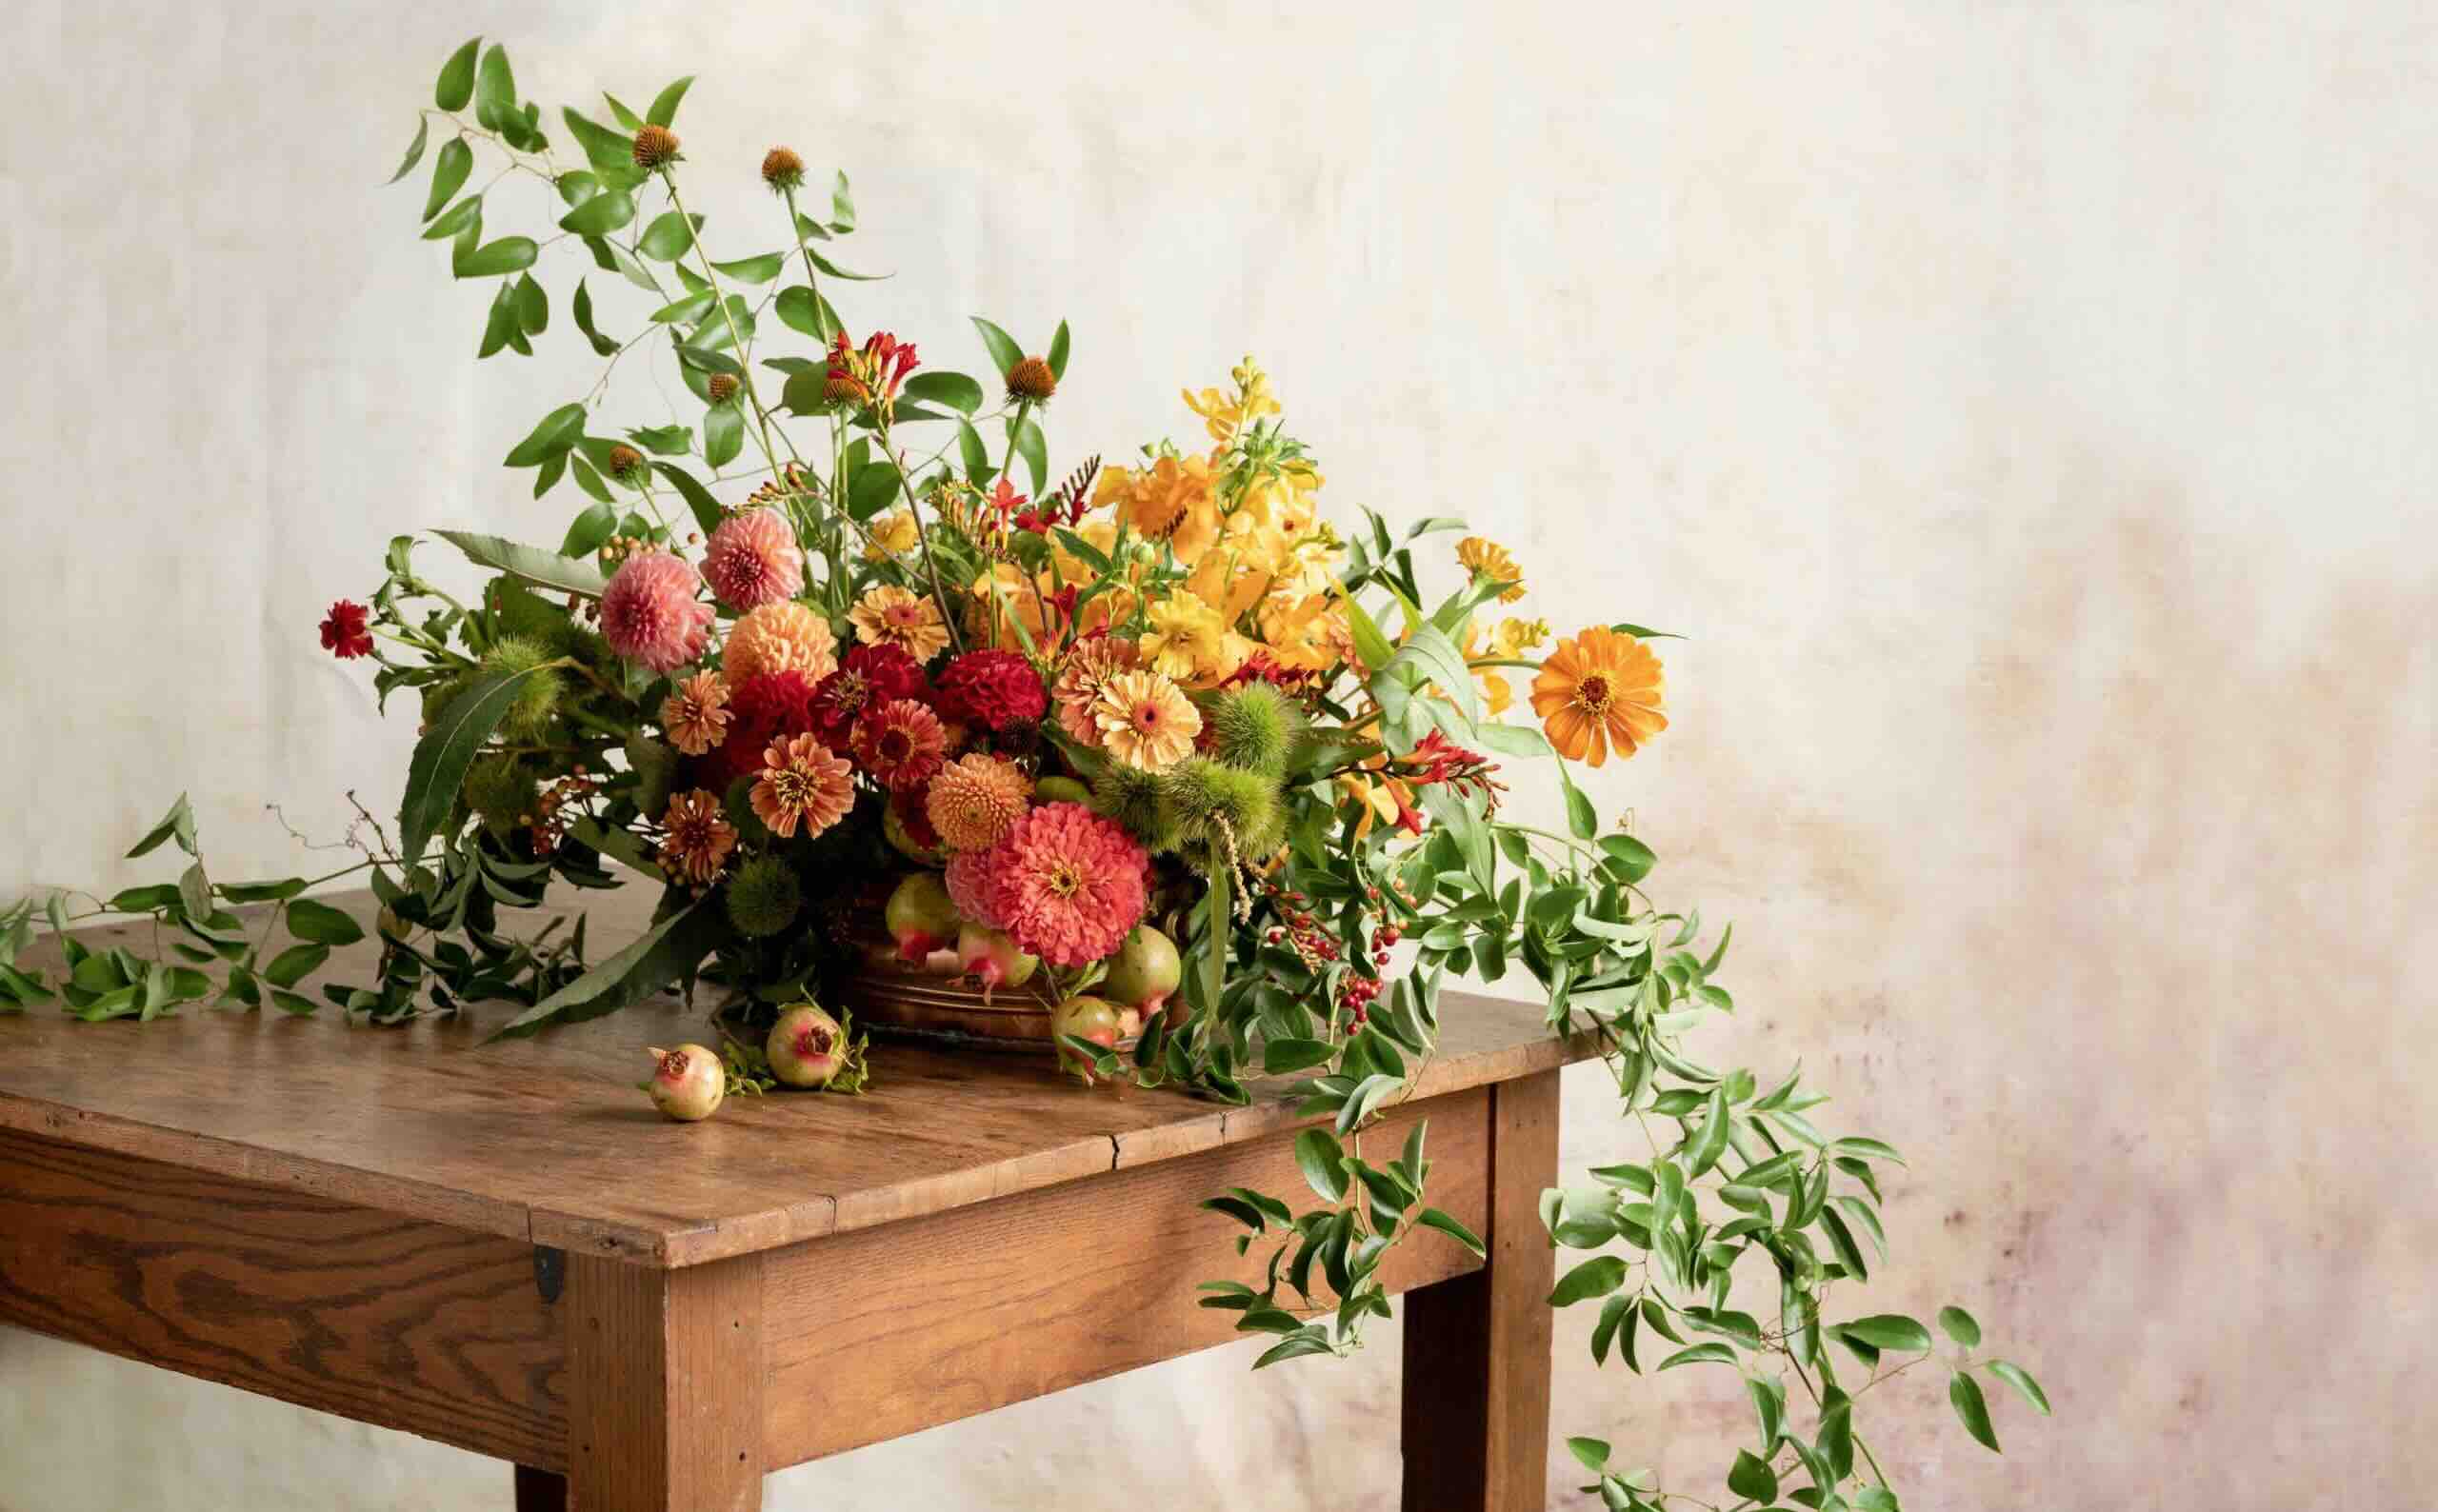 How To Connect Floral Arrangements With Vines